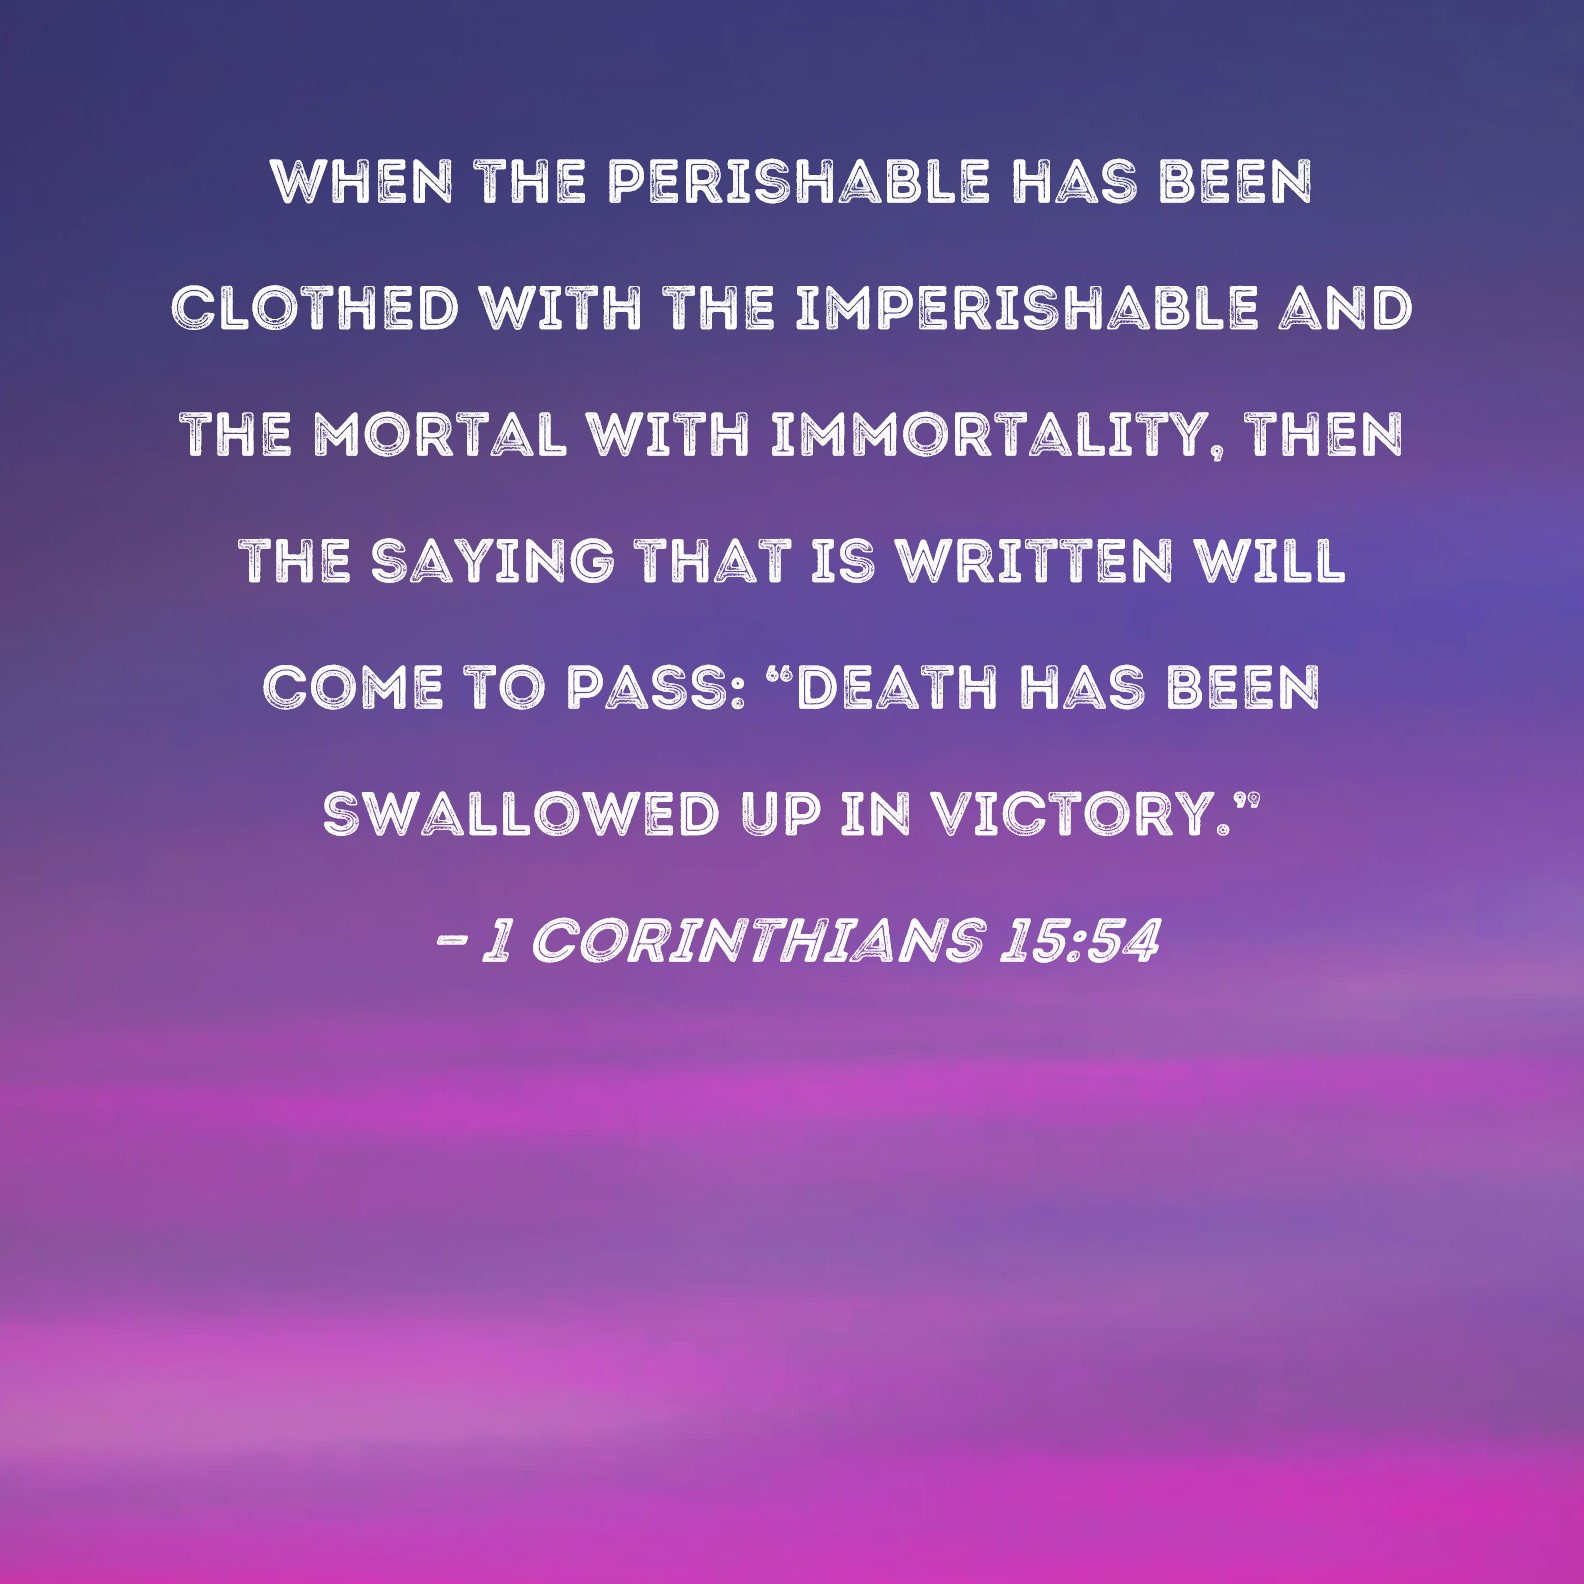 1 Corinthians 15:54 When the perishable has been clothed with the